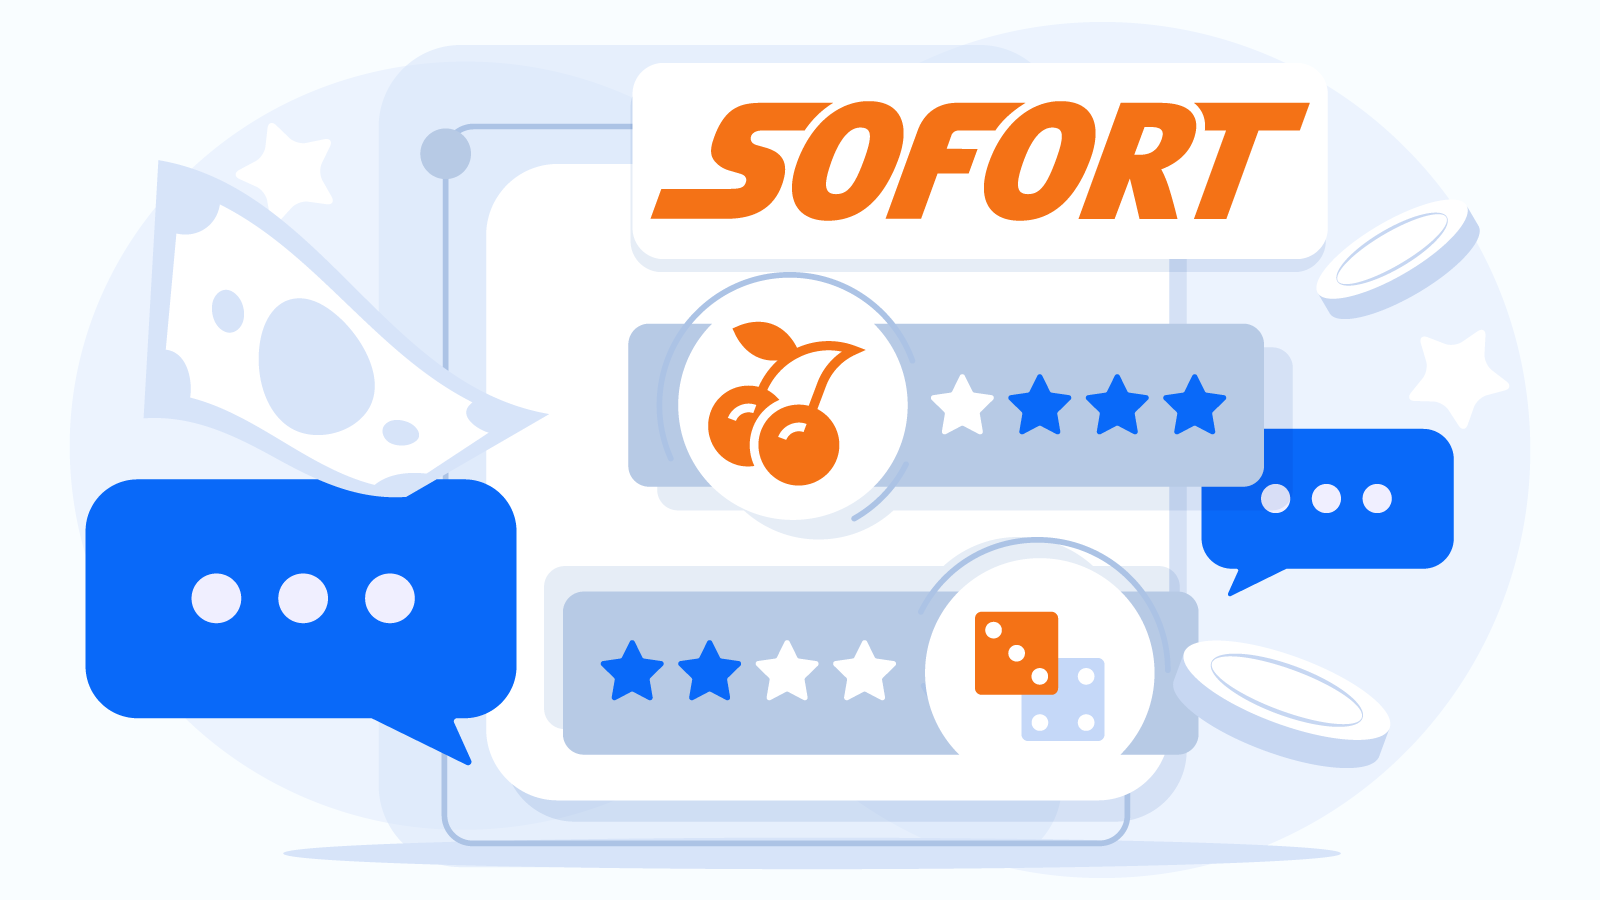 4-What-Users-Say-About-Sofort-as-a-Payment-Option